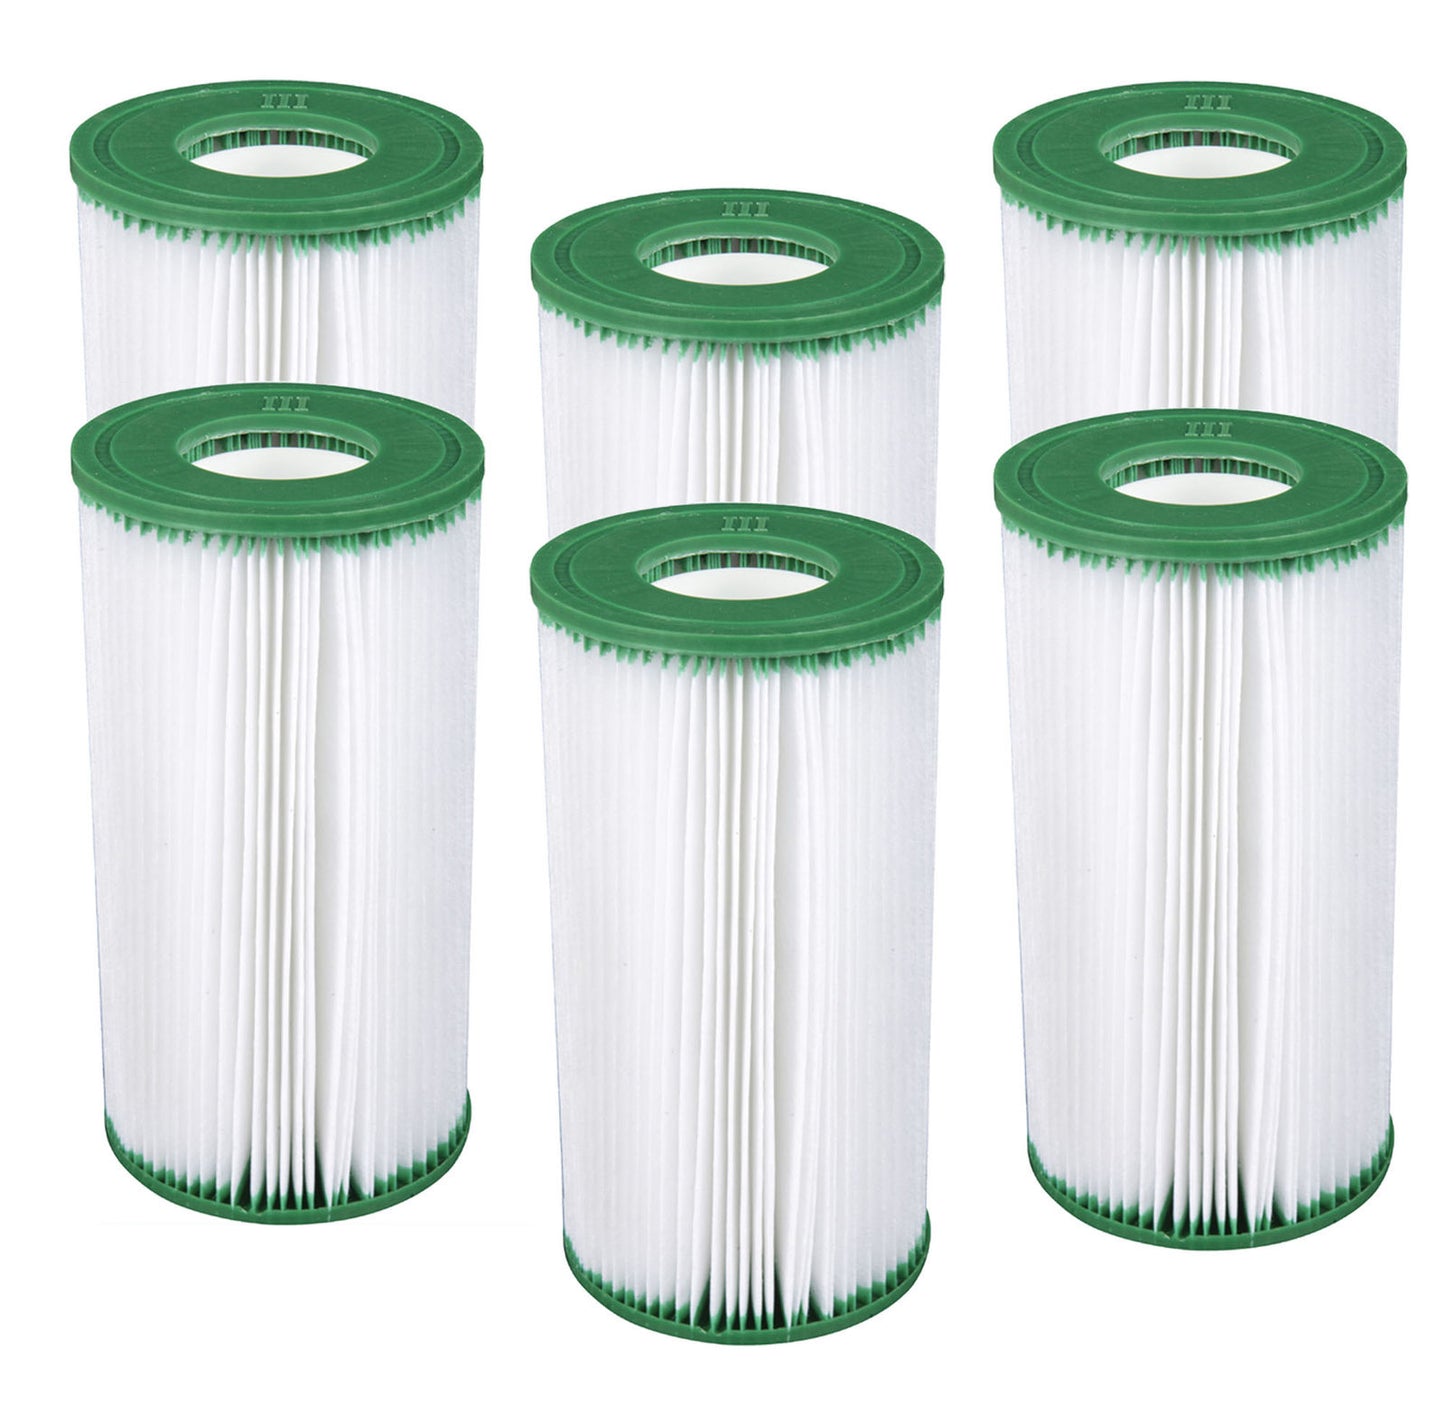 6 Pack Coleman Type III A/C Filter Cartridge for 1000 & 1500 GPH Filter Pumps